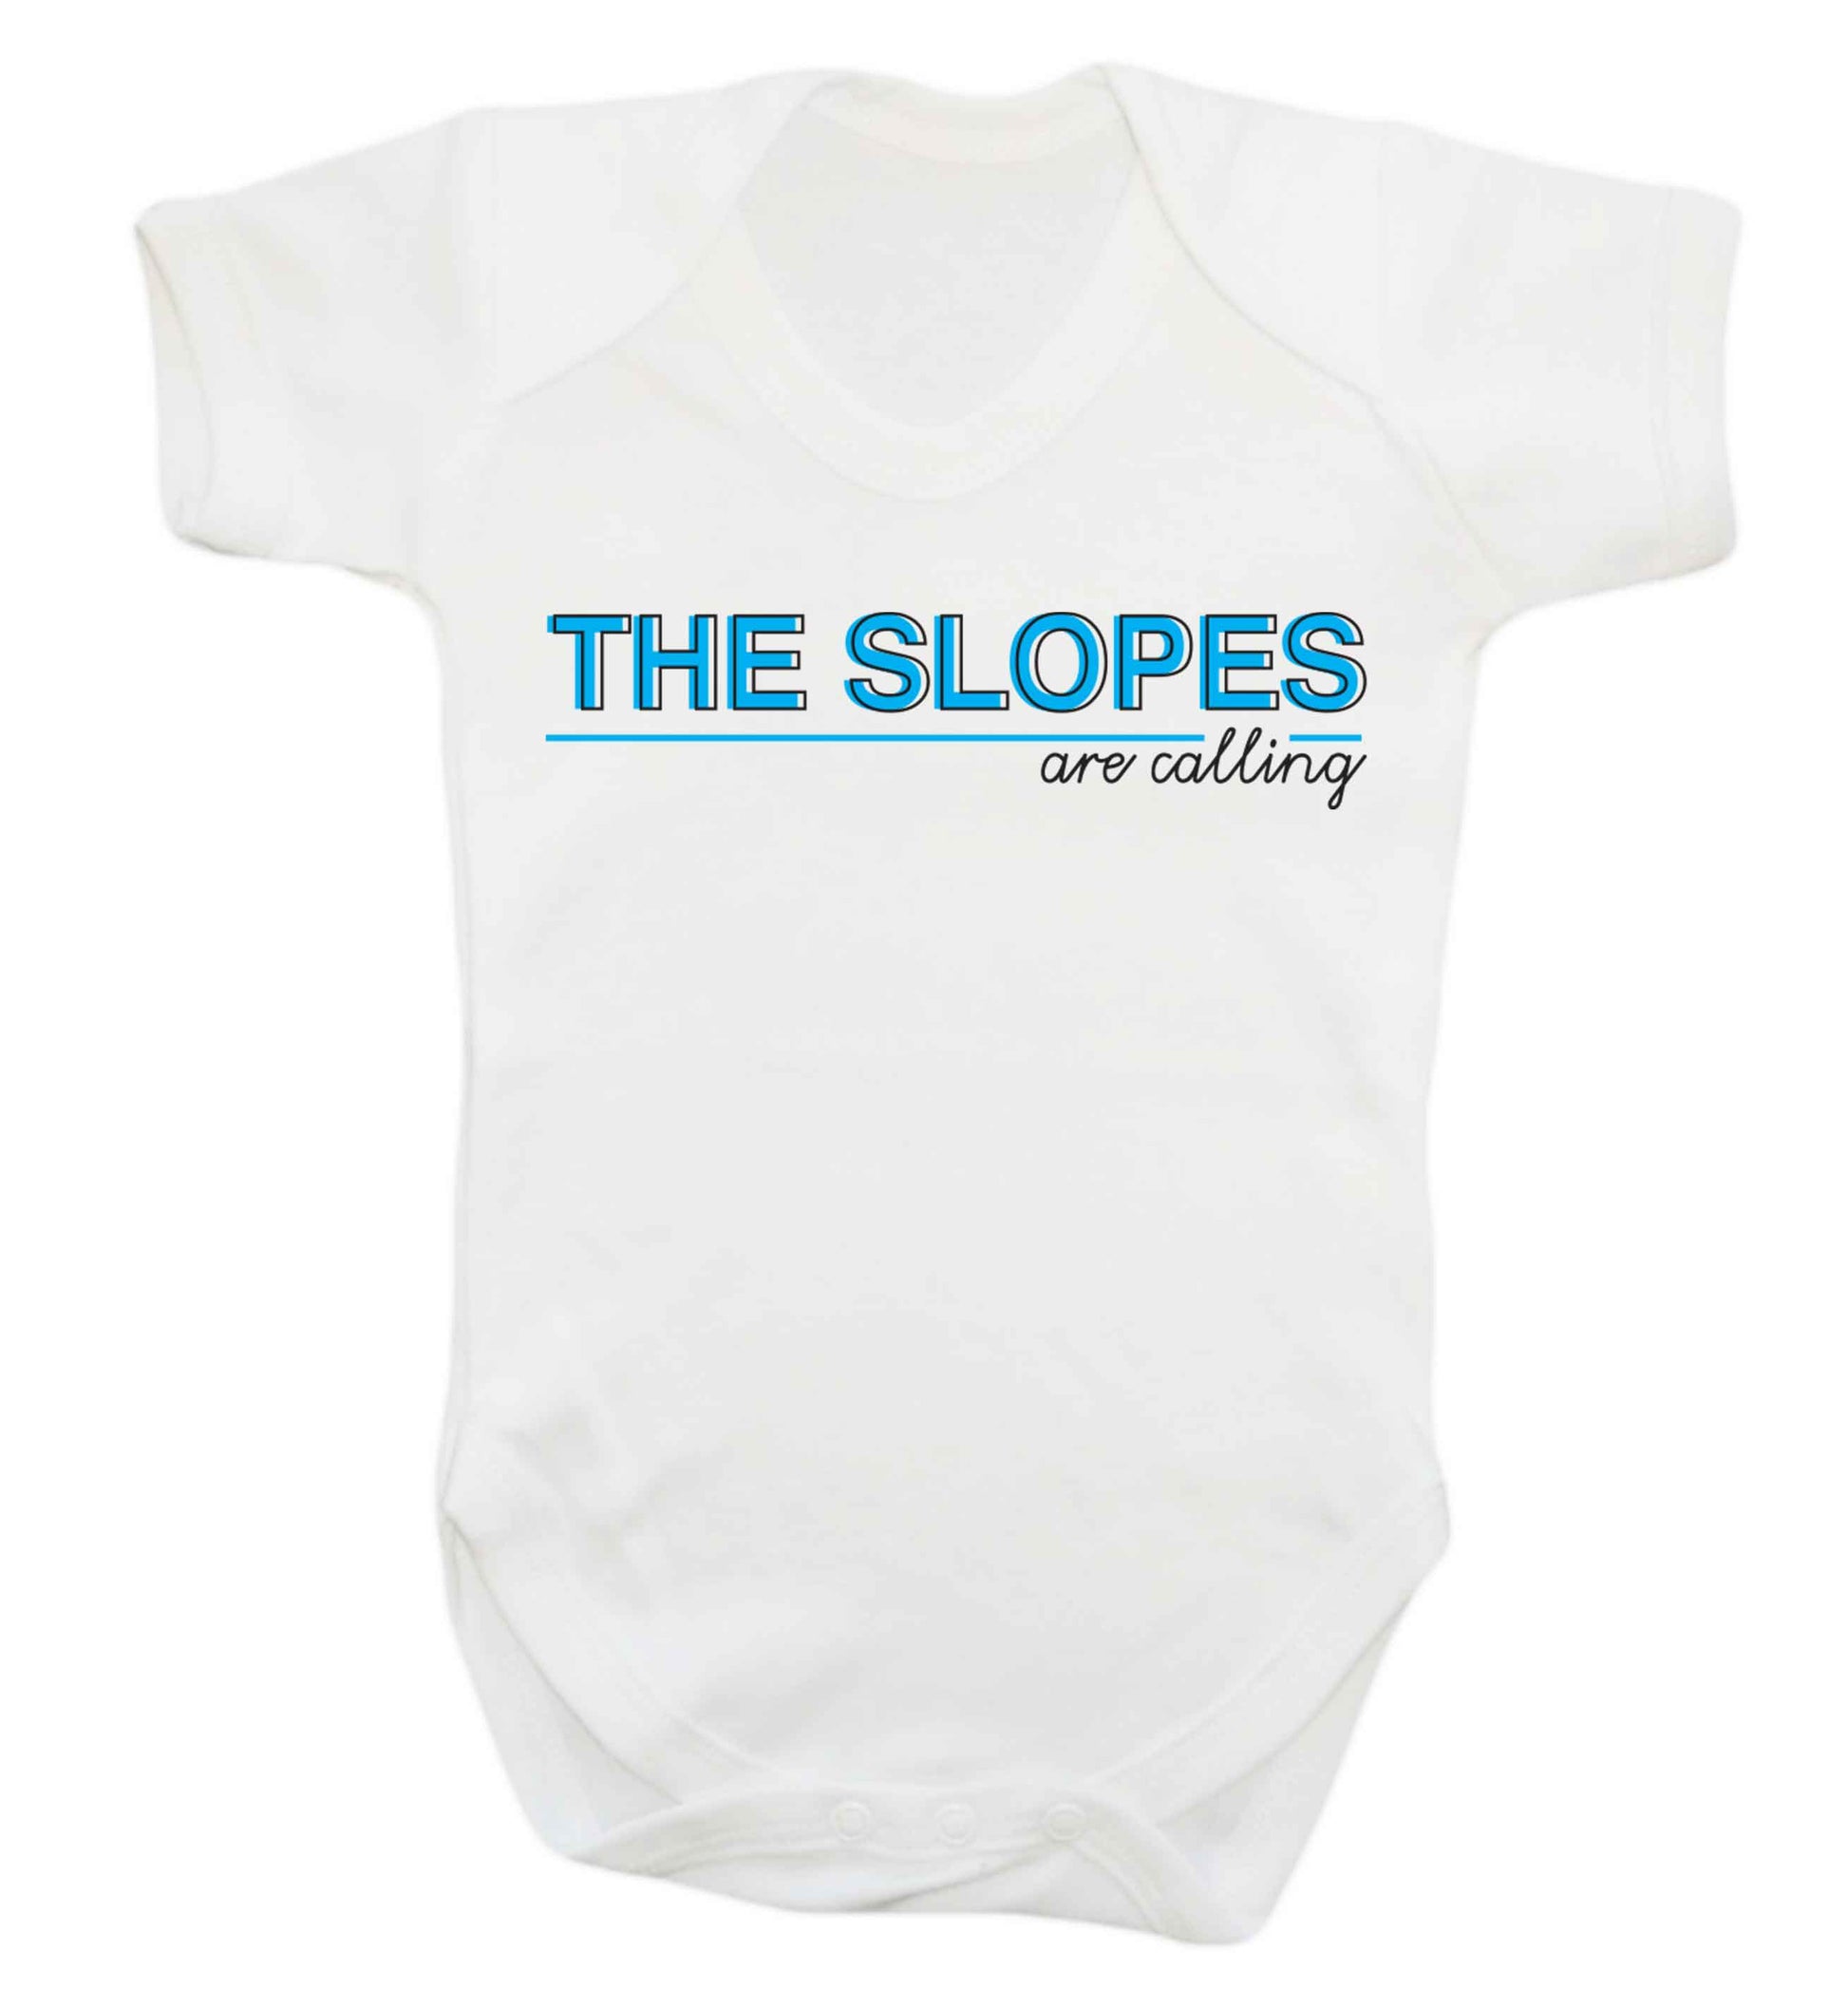 The slopes are calling Baby Vest white 18-24 months